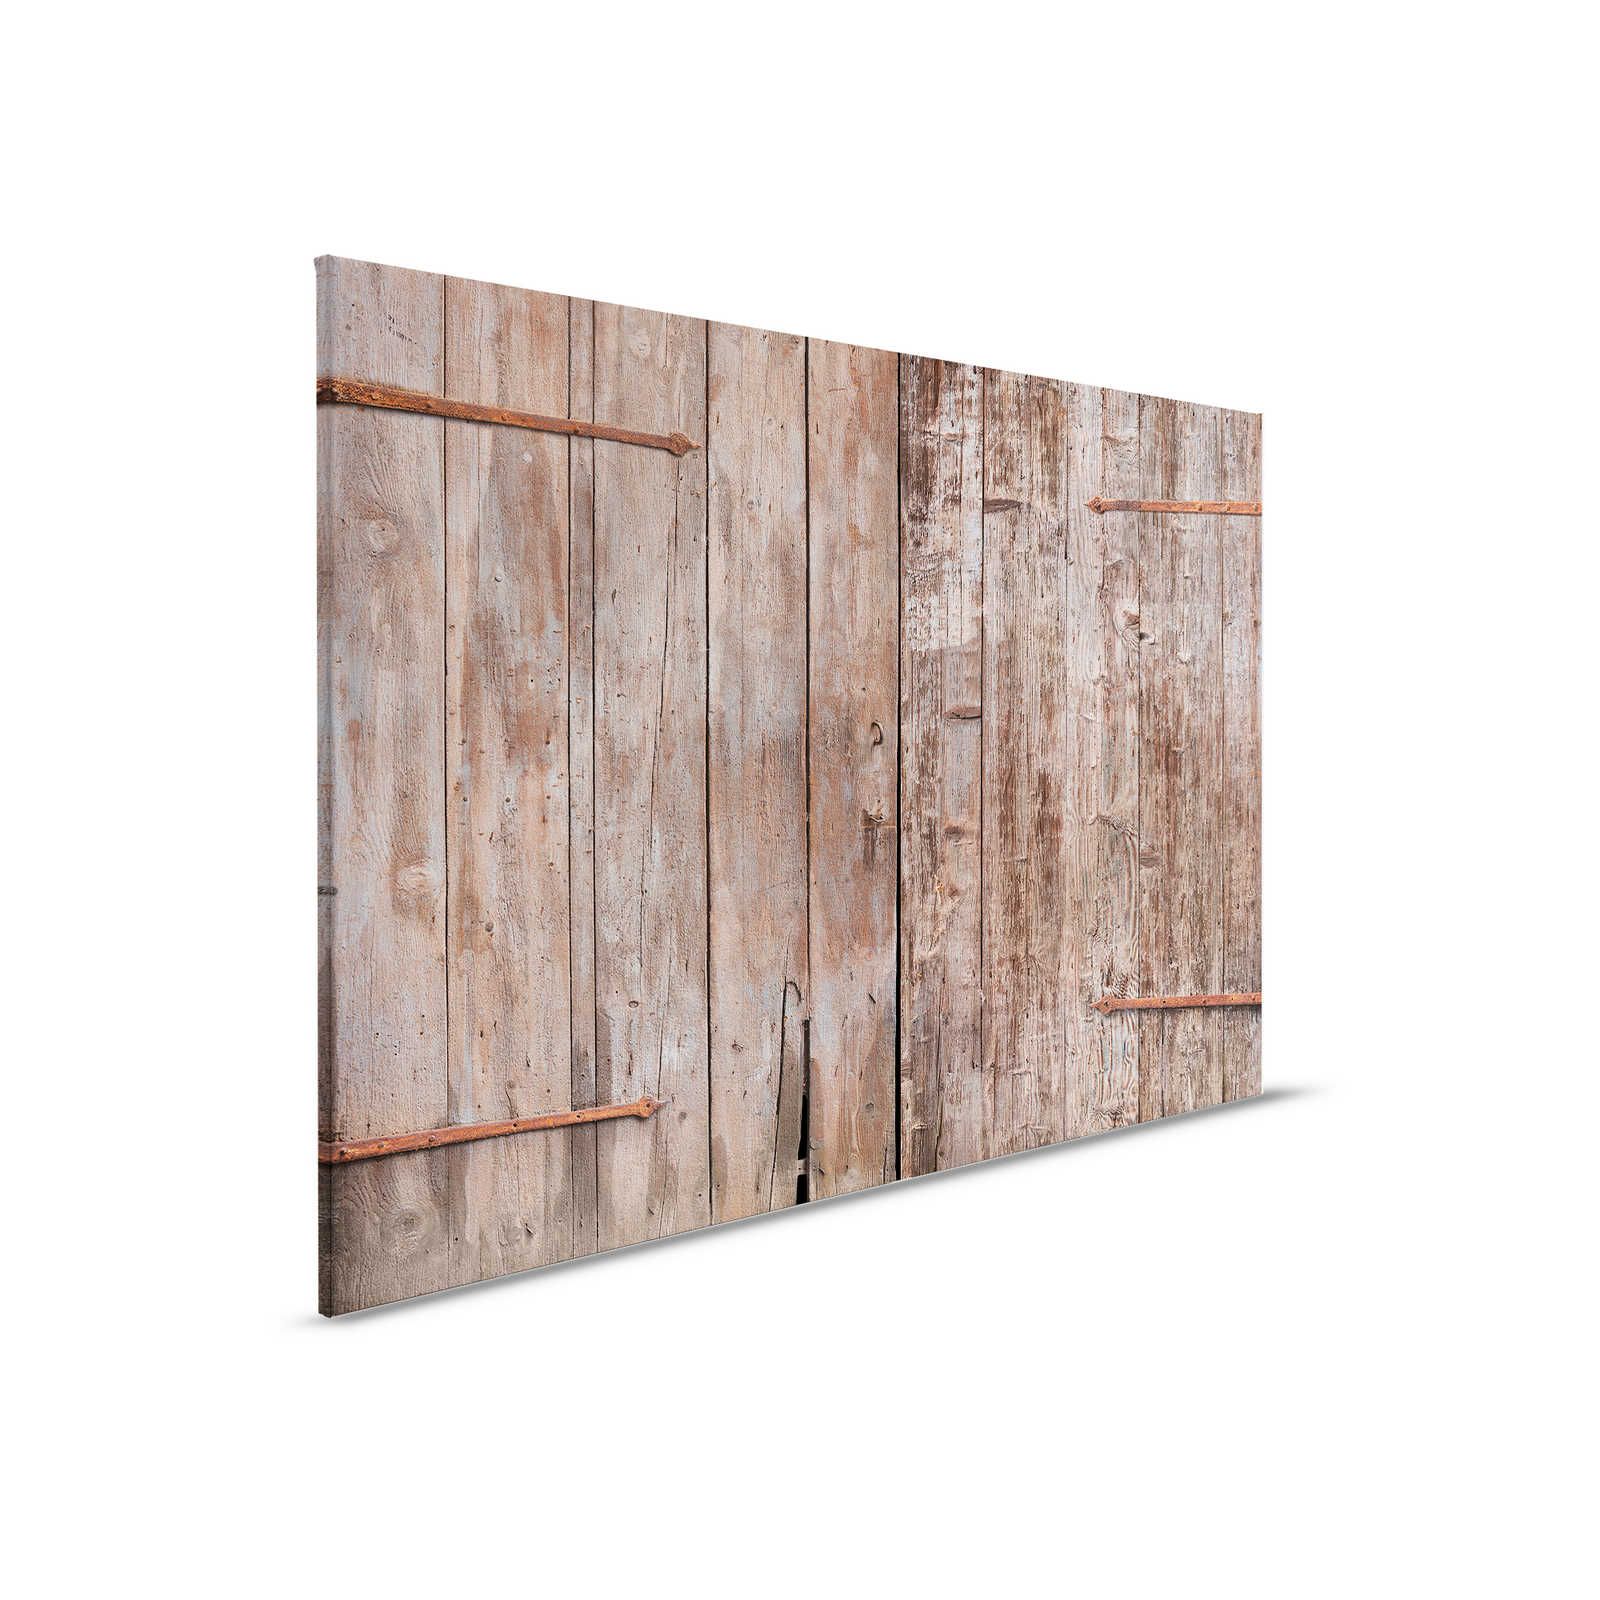         Wooden Canvas Painting Barn Door Used Look - 0,90 m x 0,60 m
    